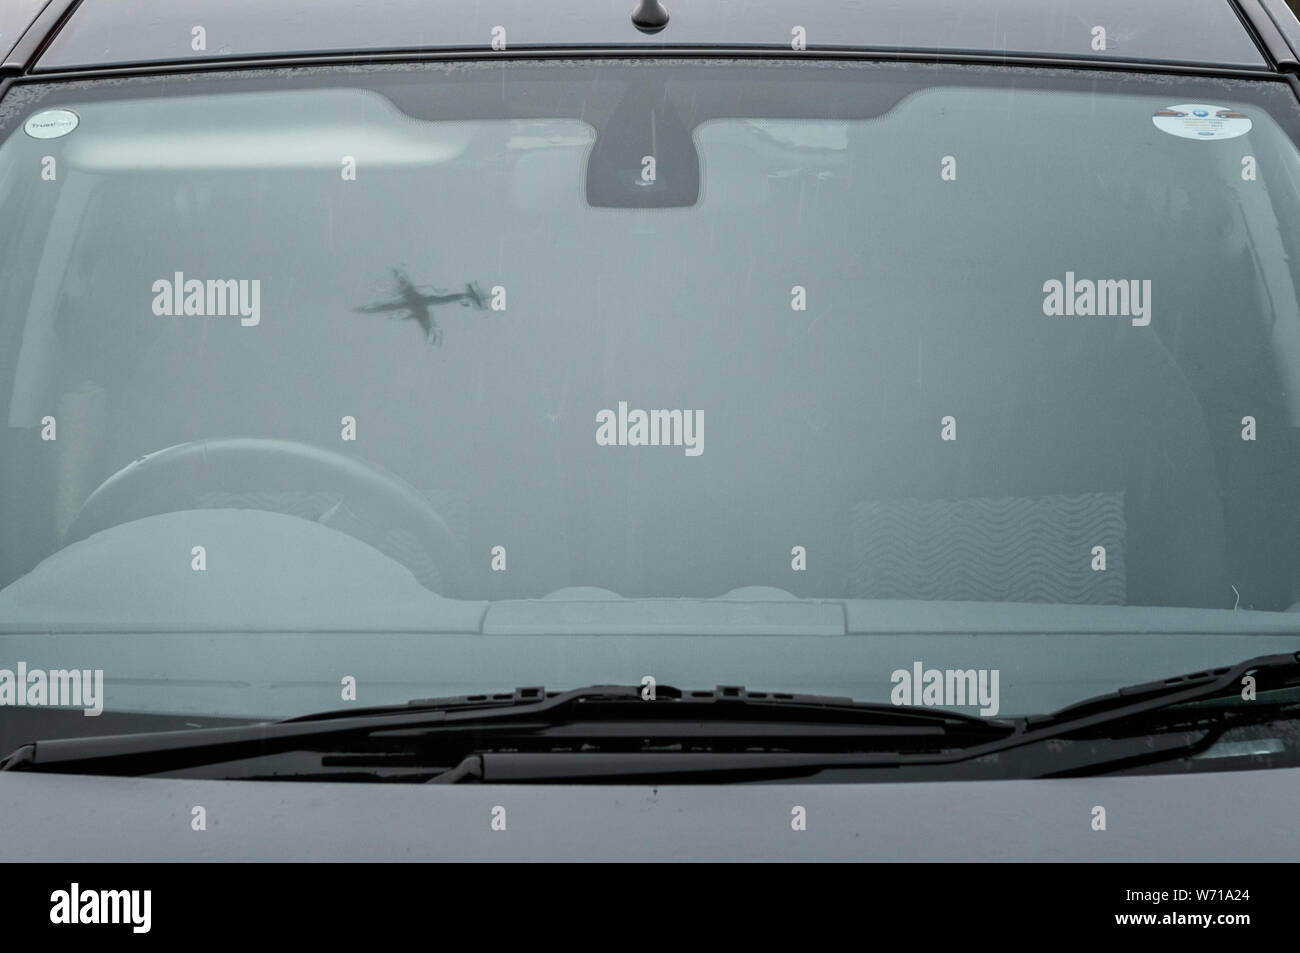 Flying airplane reflected in car windscreen, distorted by rain on the glass. Stock Photo